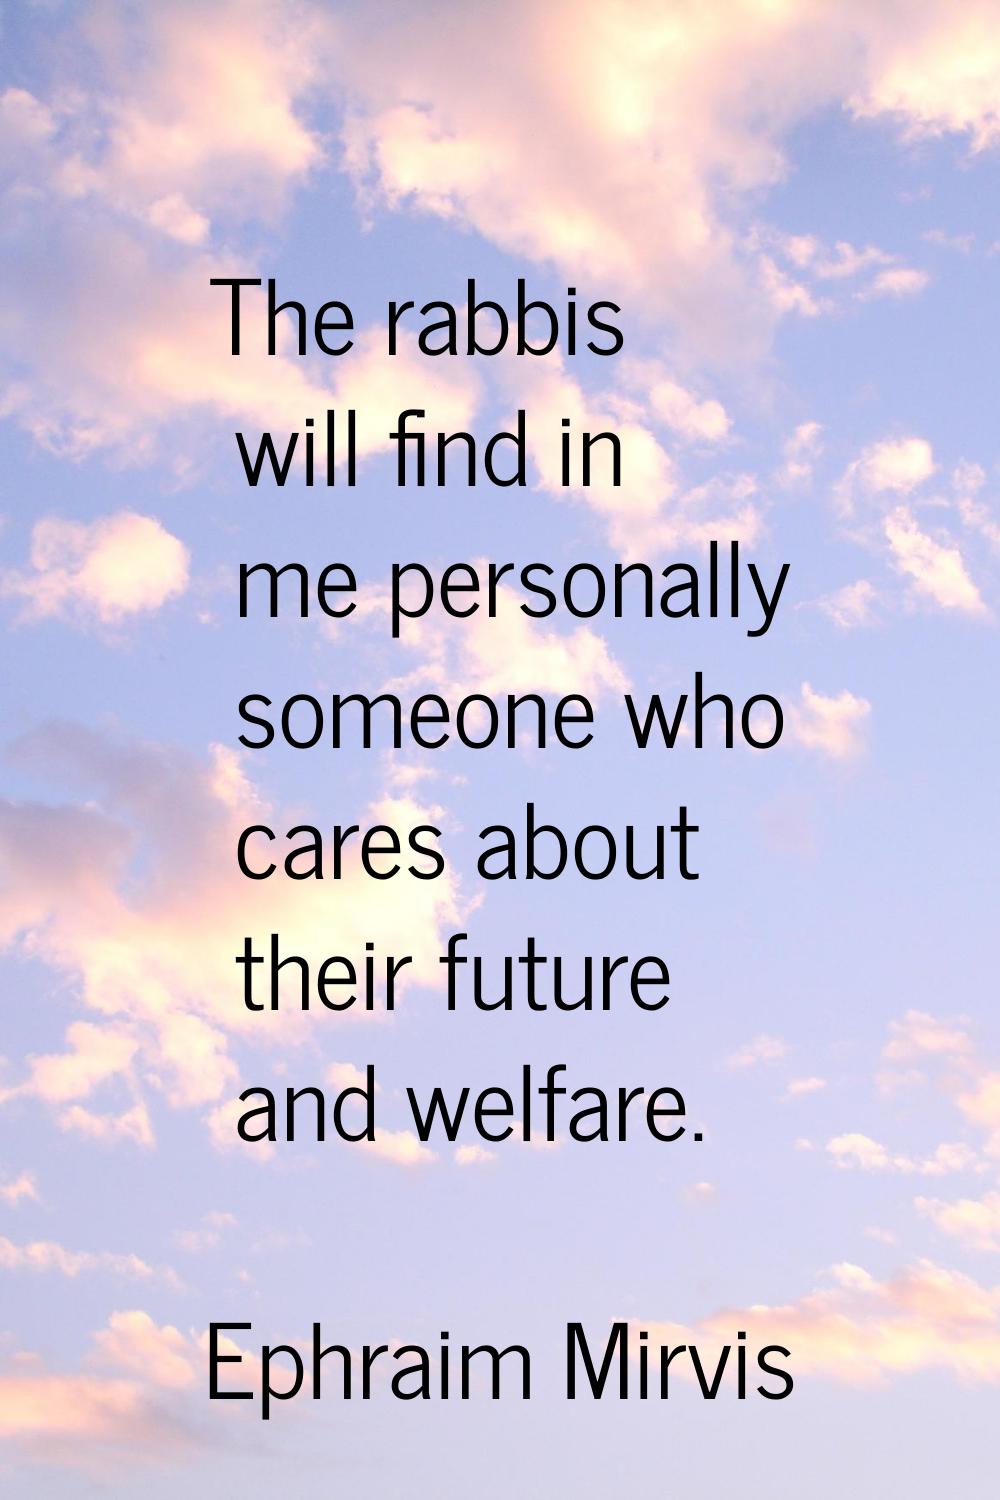 The rabbis will find in me personally someone who cares about their future and welfare.